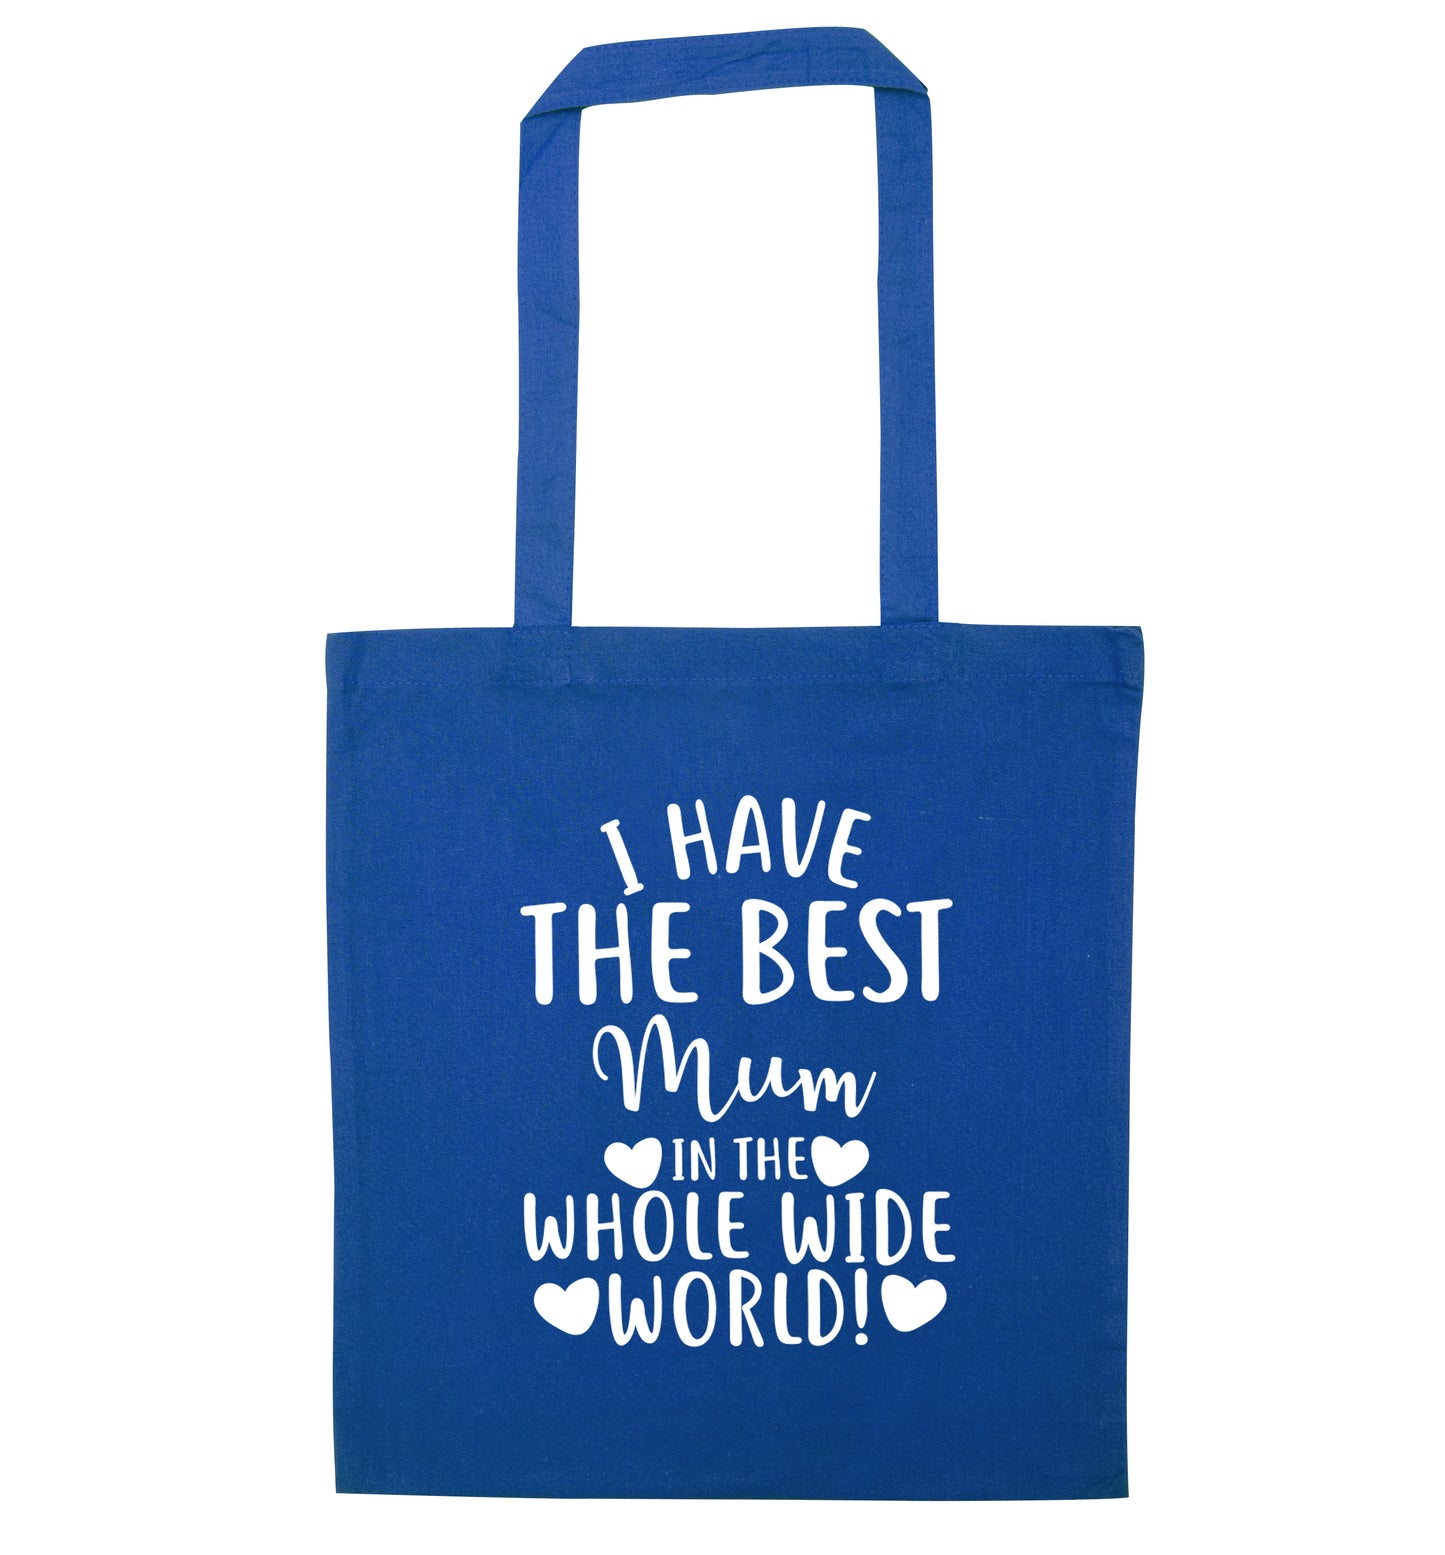 I have the best mum in the whole wide world! blue tote bag